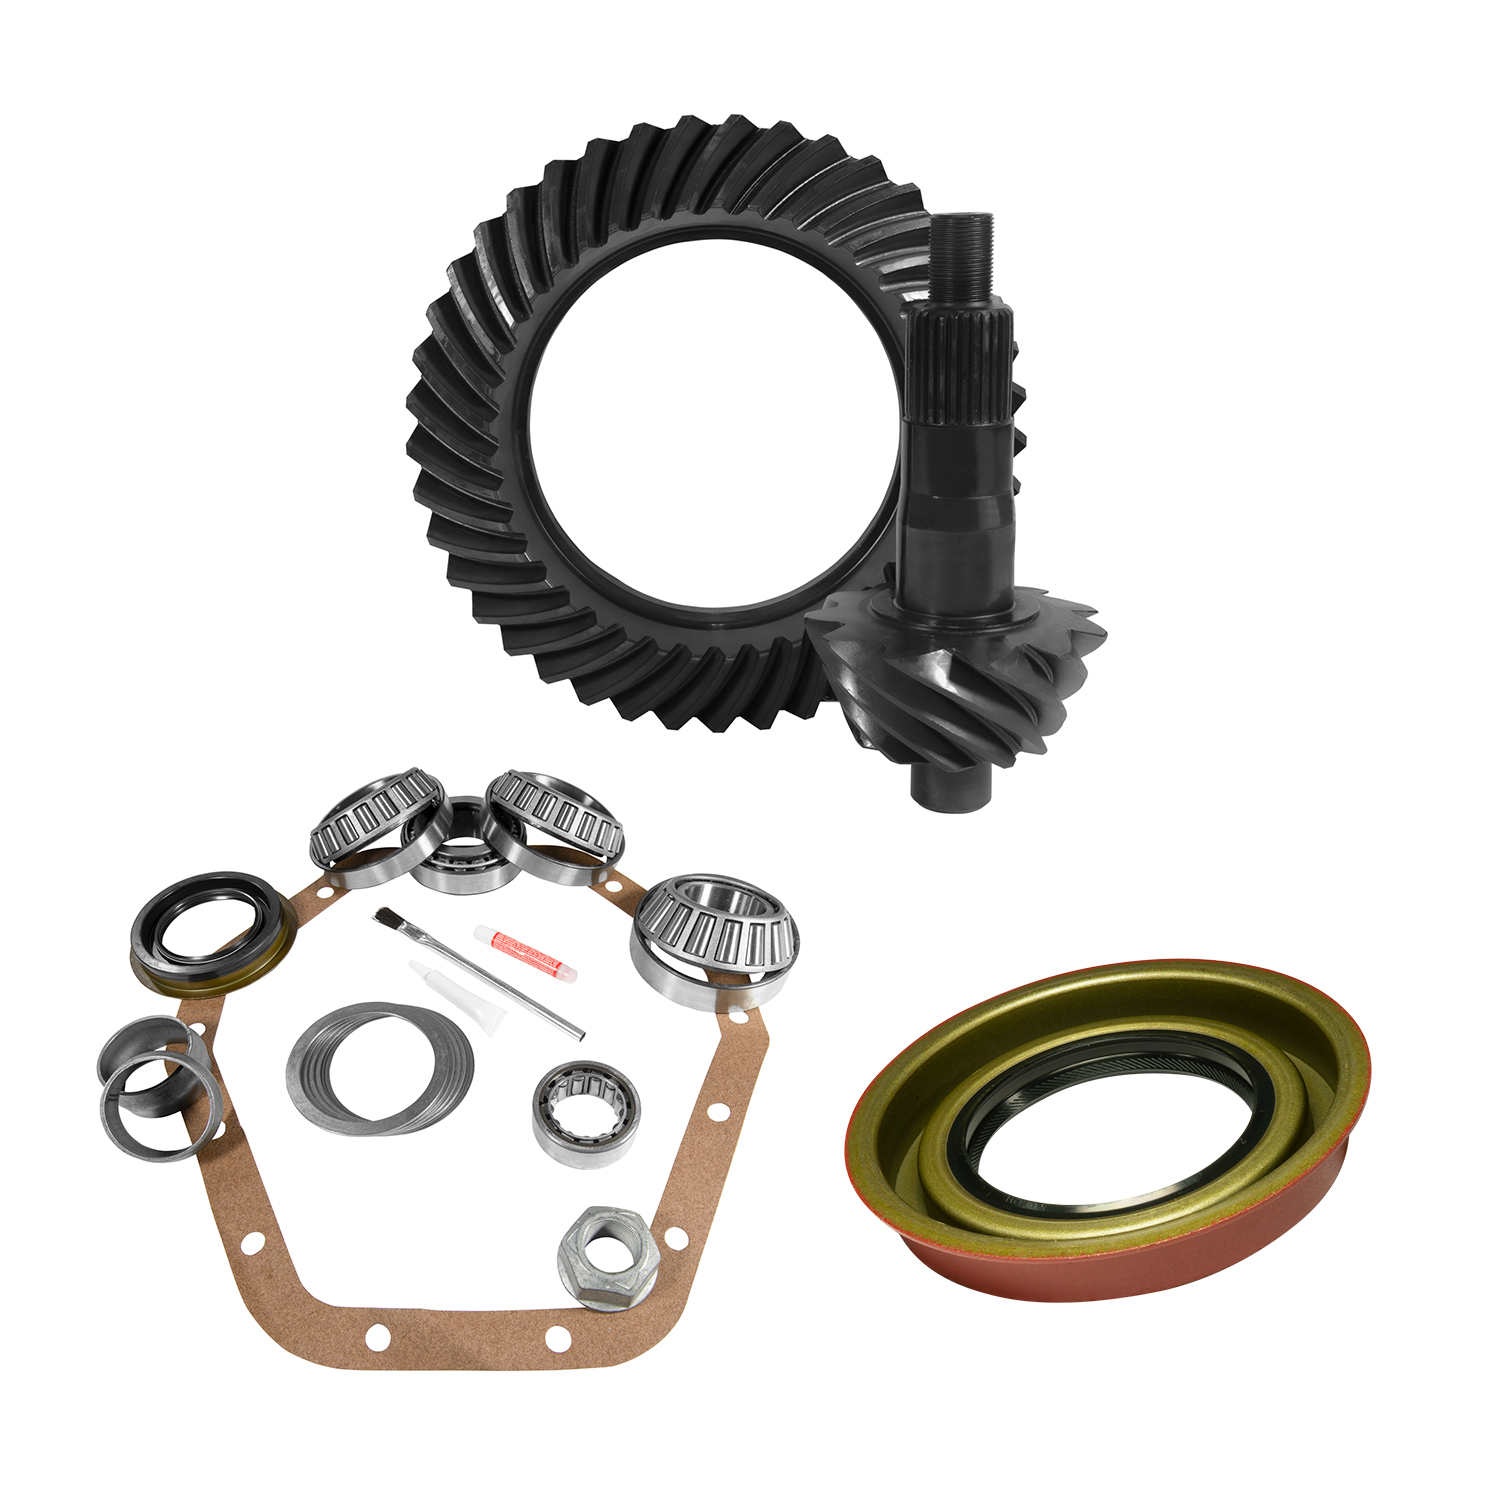 10.5" GM 14 Bolt 5.13 Thick Rear Ring & Pinion and Install Kit 